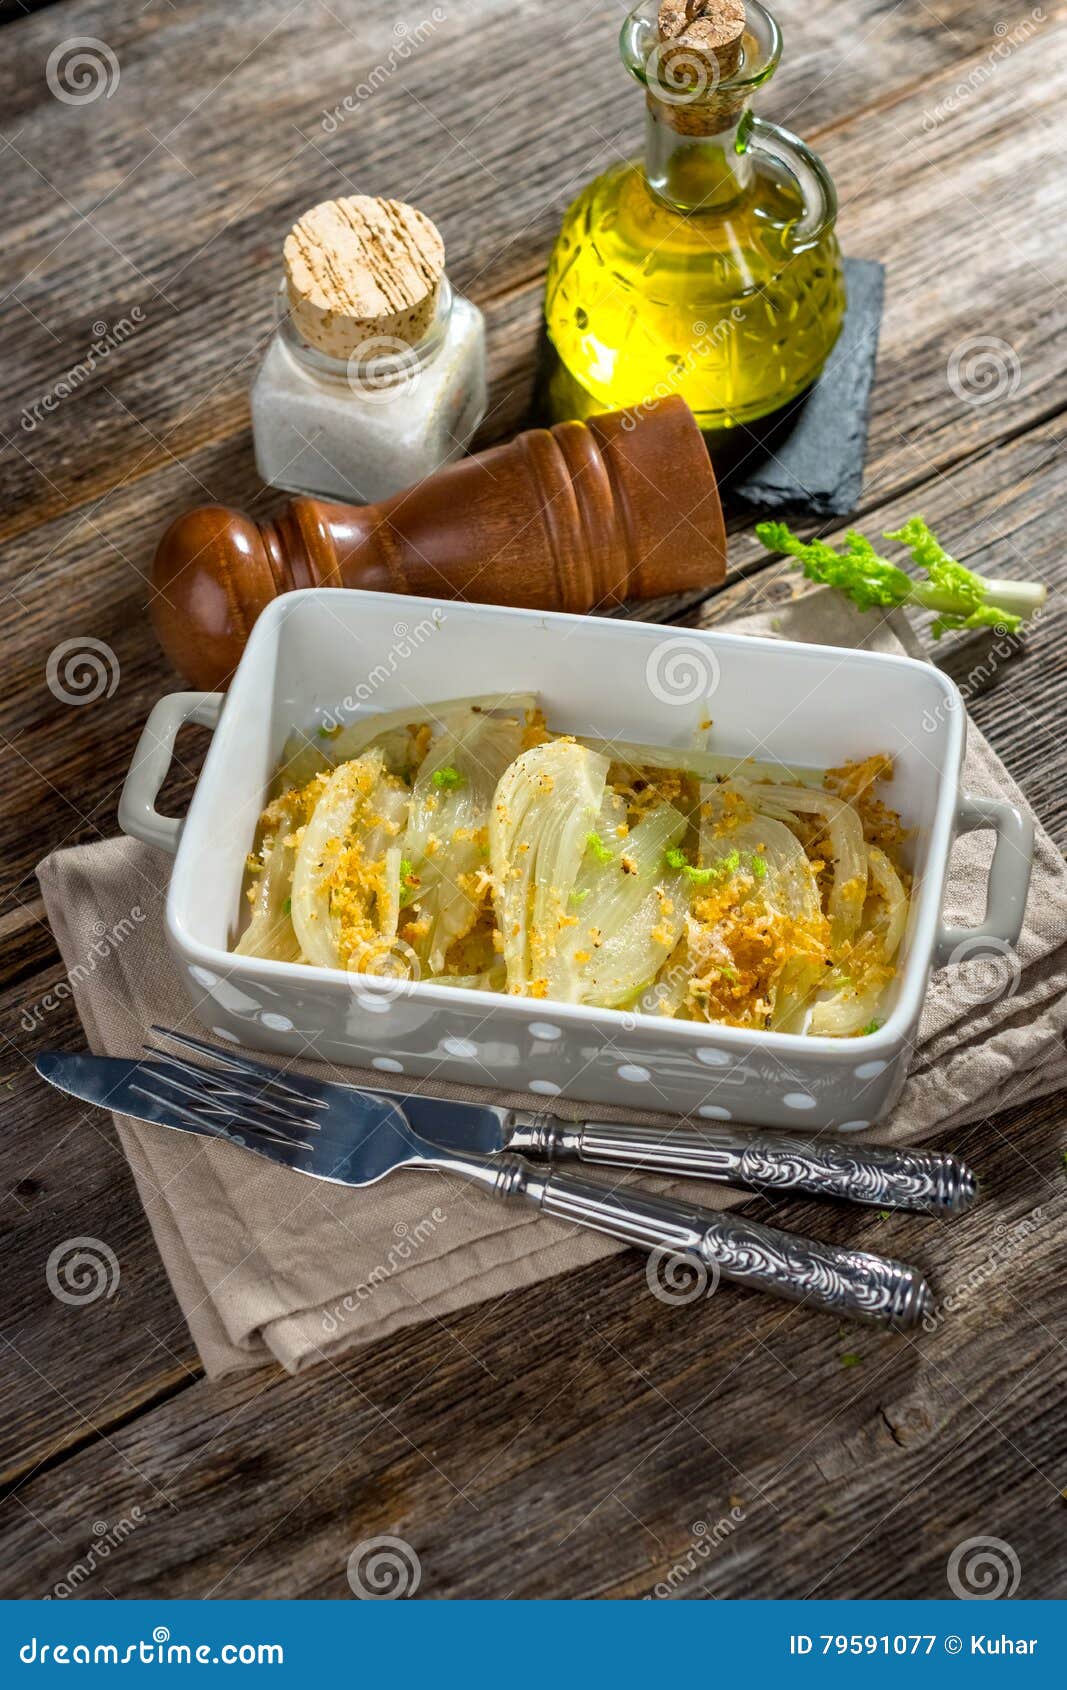 baked fennel with parmesan